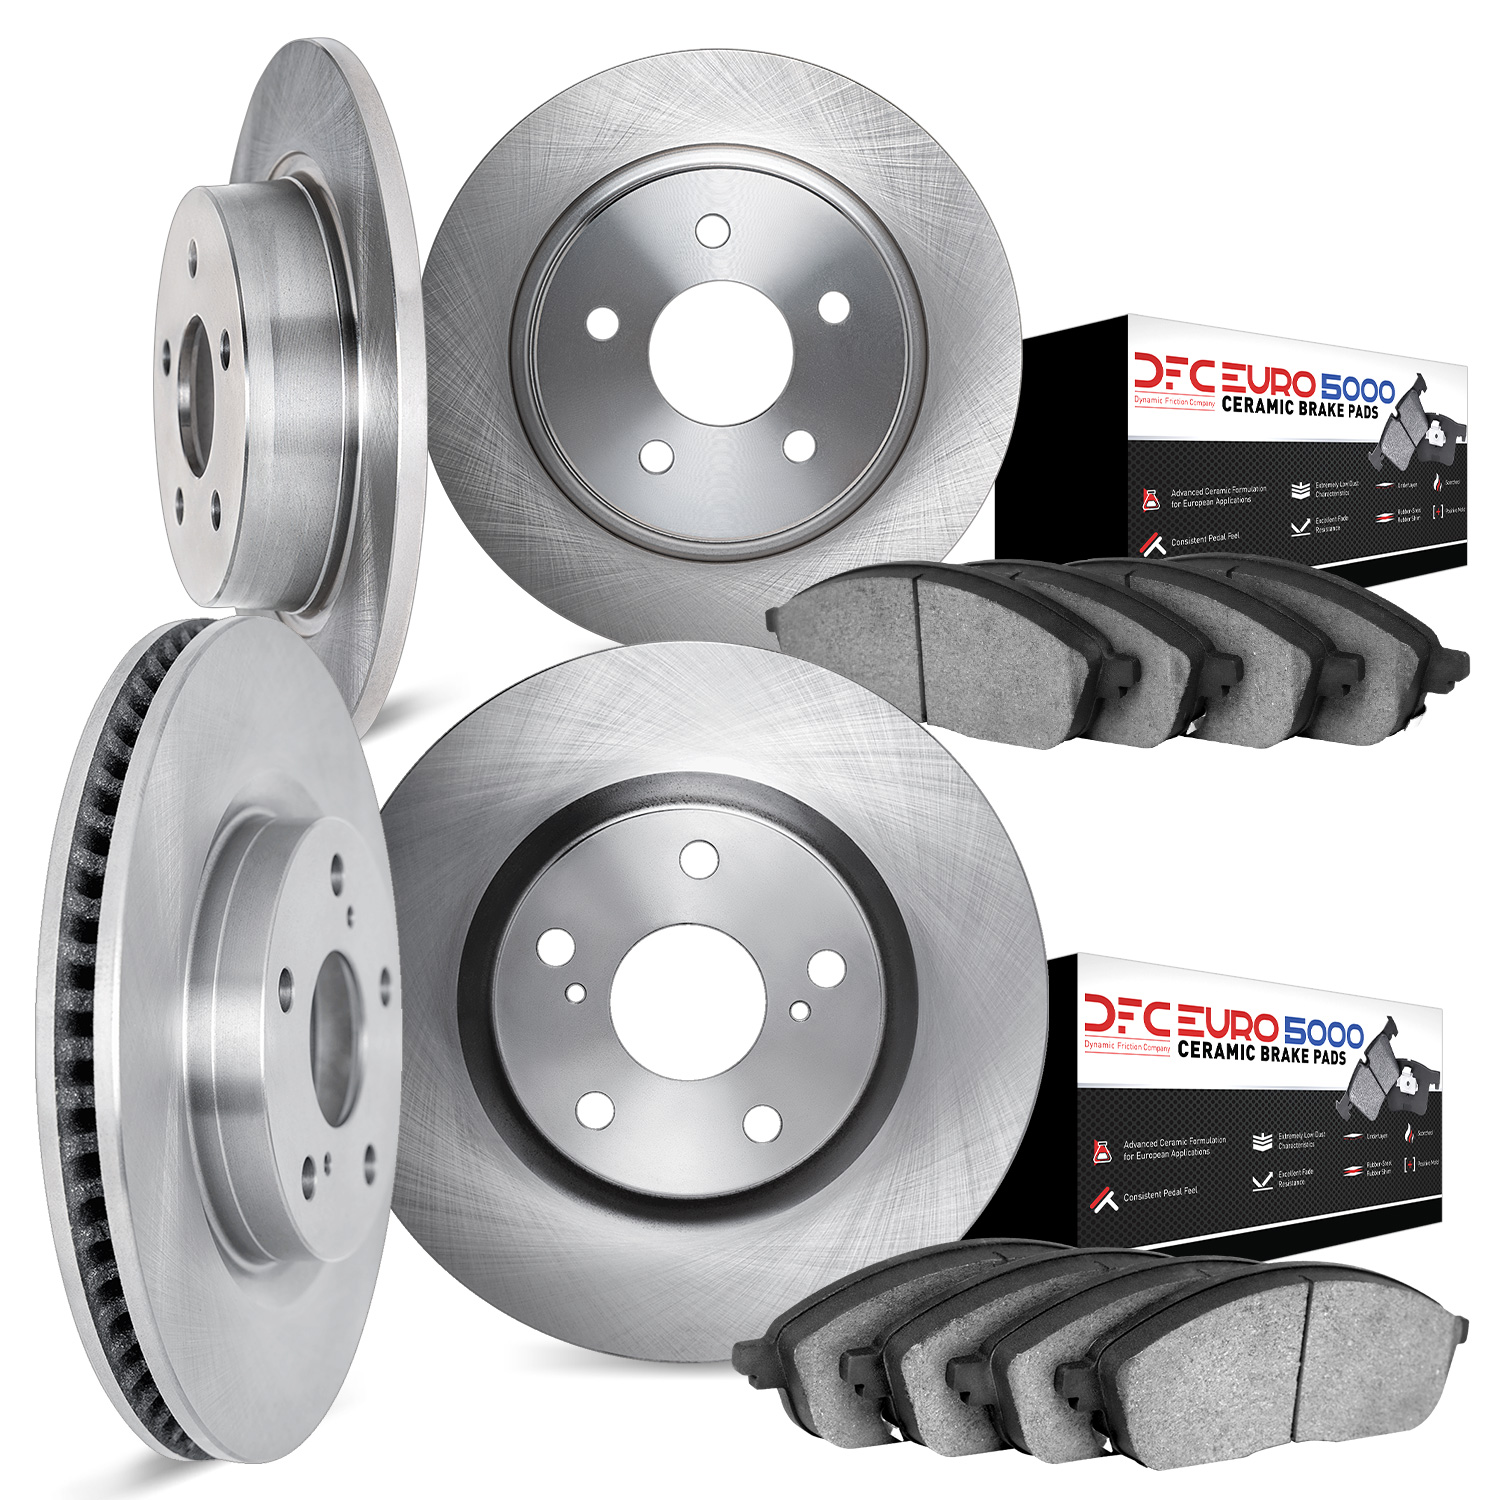 6604-63020 Brake Rotors w/5000 Euro Ceramic Brake Pads, 2004-2006 Mercedes-Benz, Position: Front and Rear